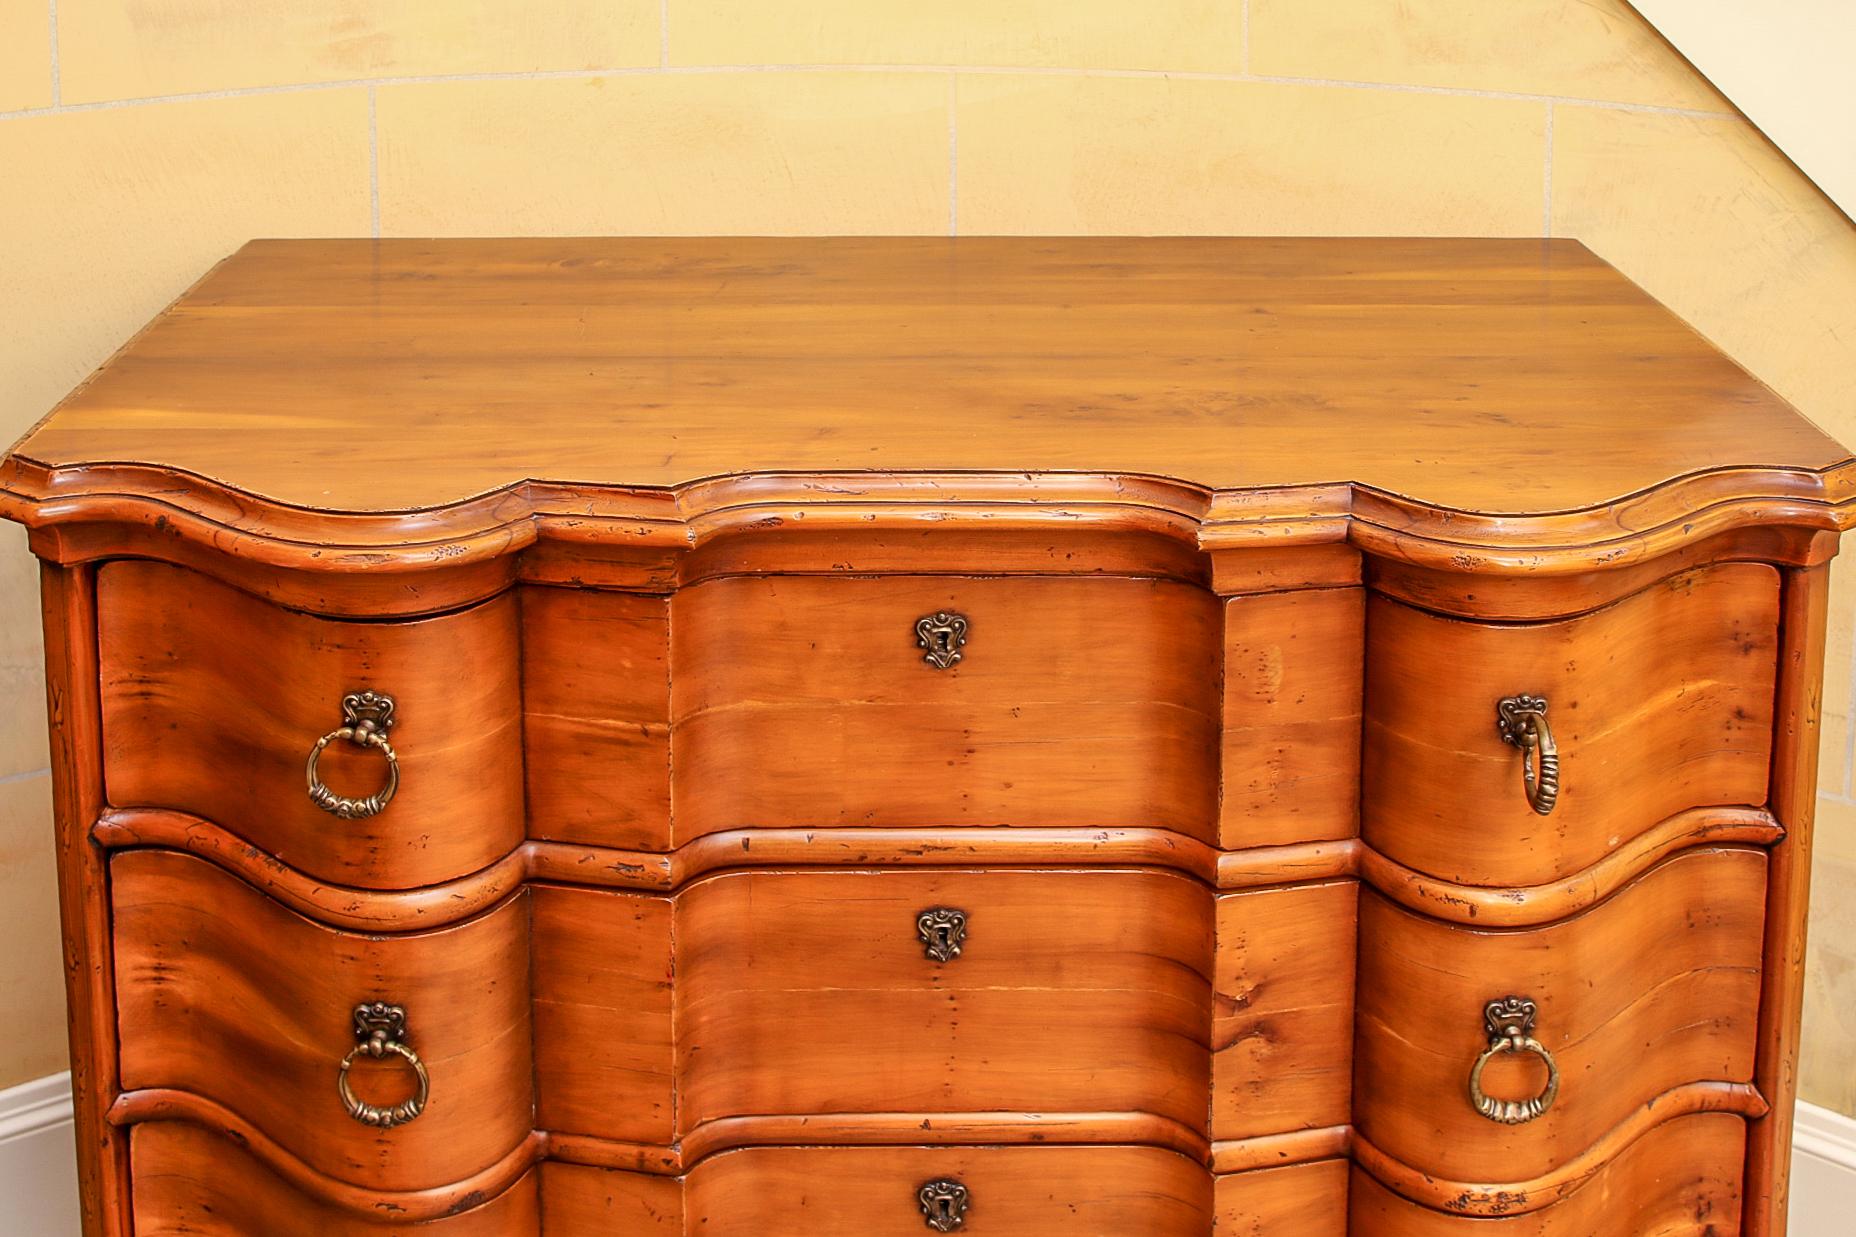 Dutch-style chest by Alfonso Marina [Mexico City] with serpentine front, four drawers, bold moulded trim, brass drop pulls and escutcheons, raised on bun feet.

Condition: Good condition with expected signs of use and wear including some light